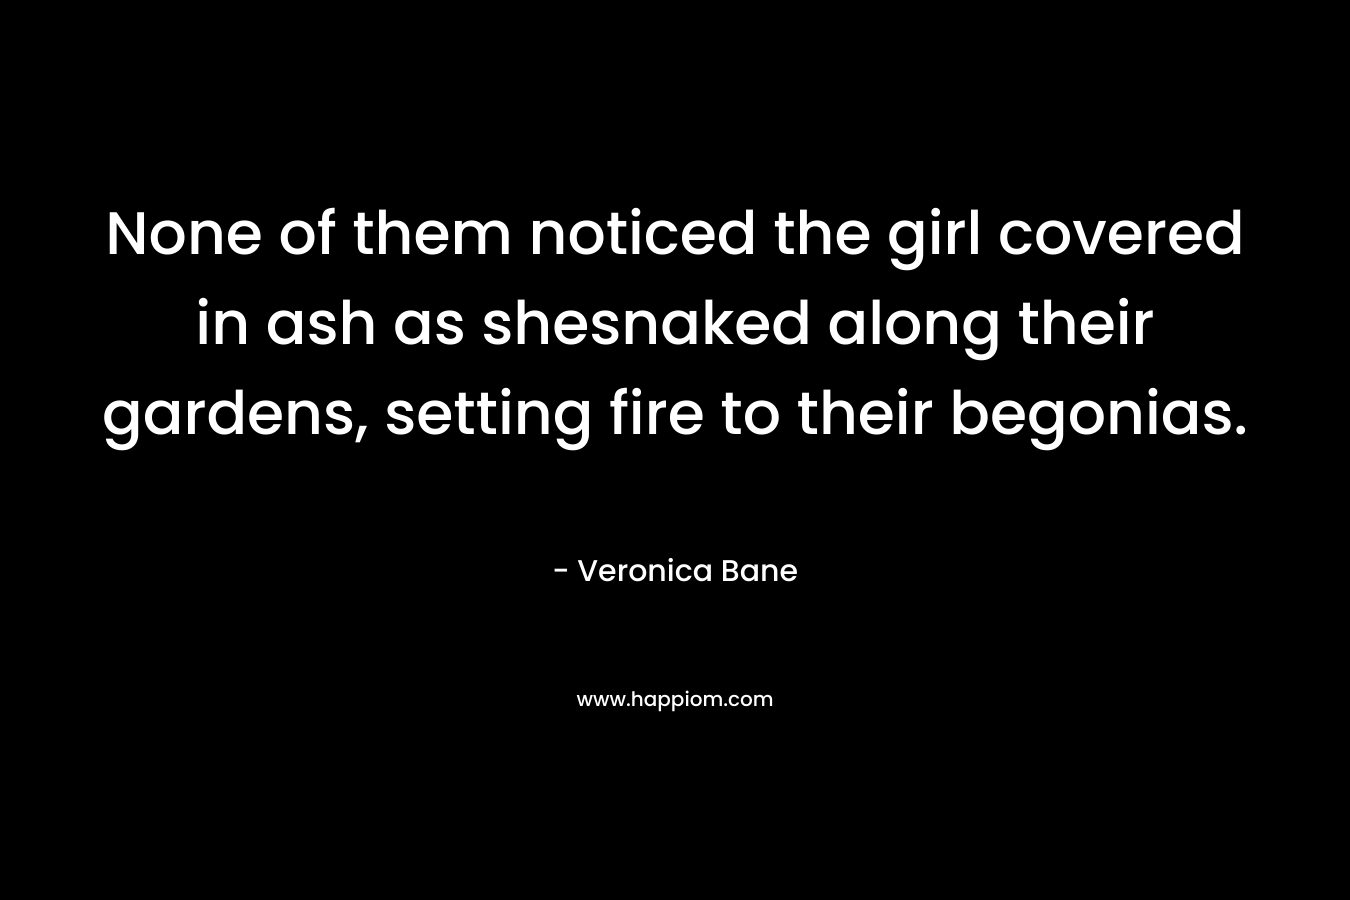 None of them noticed the girl covered in ash as shesnaked along their gardens, setting fire to their begonias.